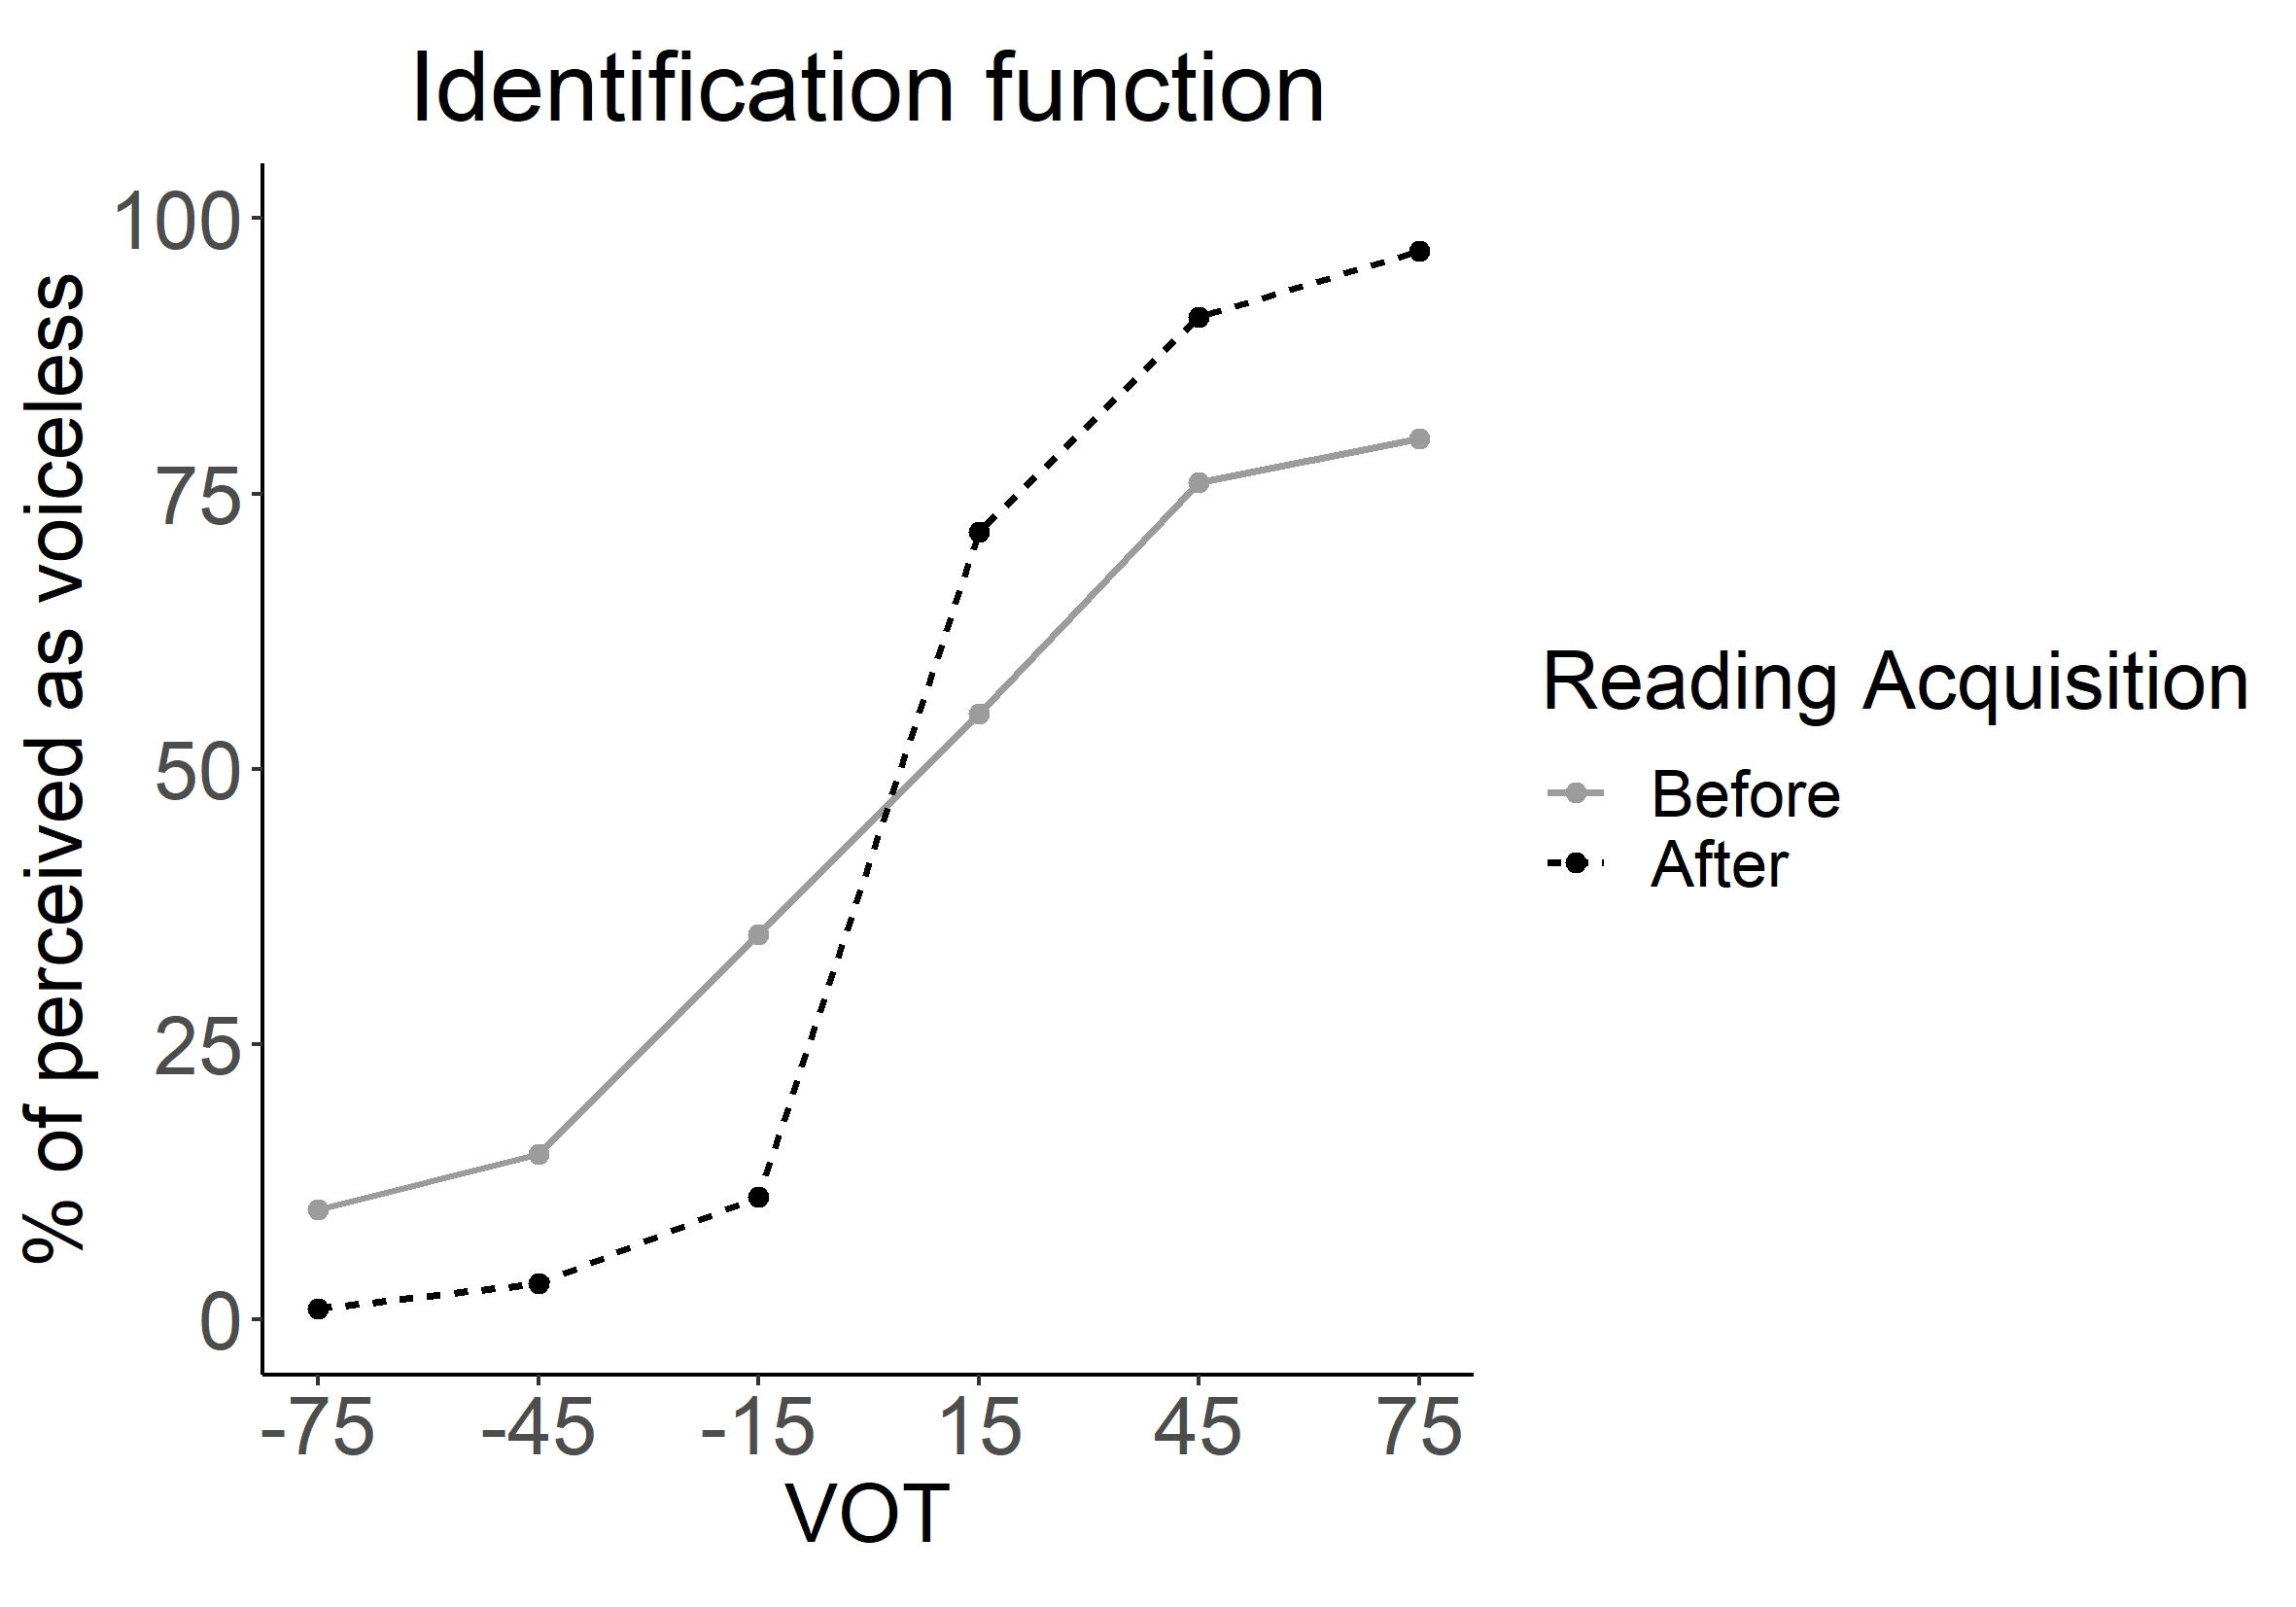 Expample of an Identification function on a VOT continuum. Visual representation of how boundary precision changes after reading acquisition based on simulated data. The improvement in boundary precision, and consequently, categorical perception, is manifested as the increase in the steepness of the identification function (dark dotted line).